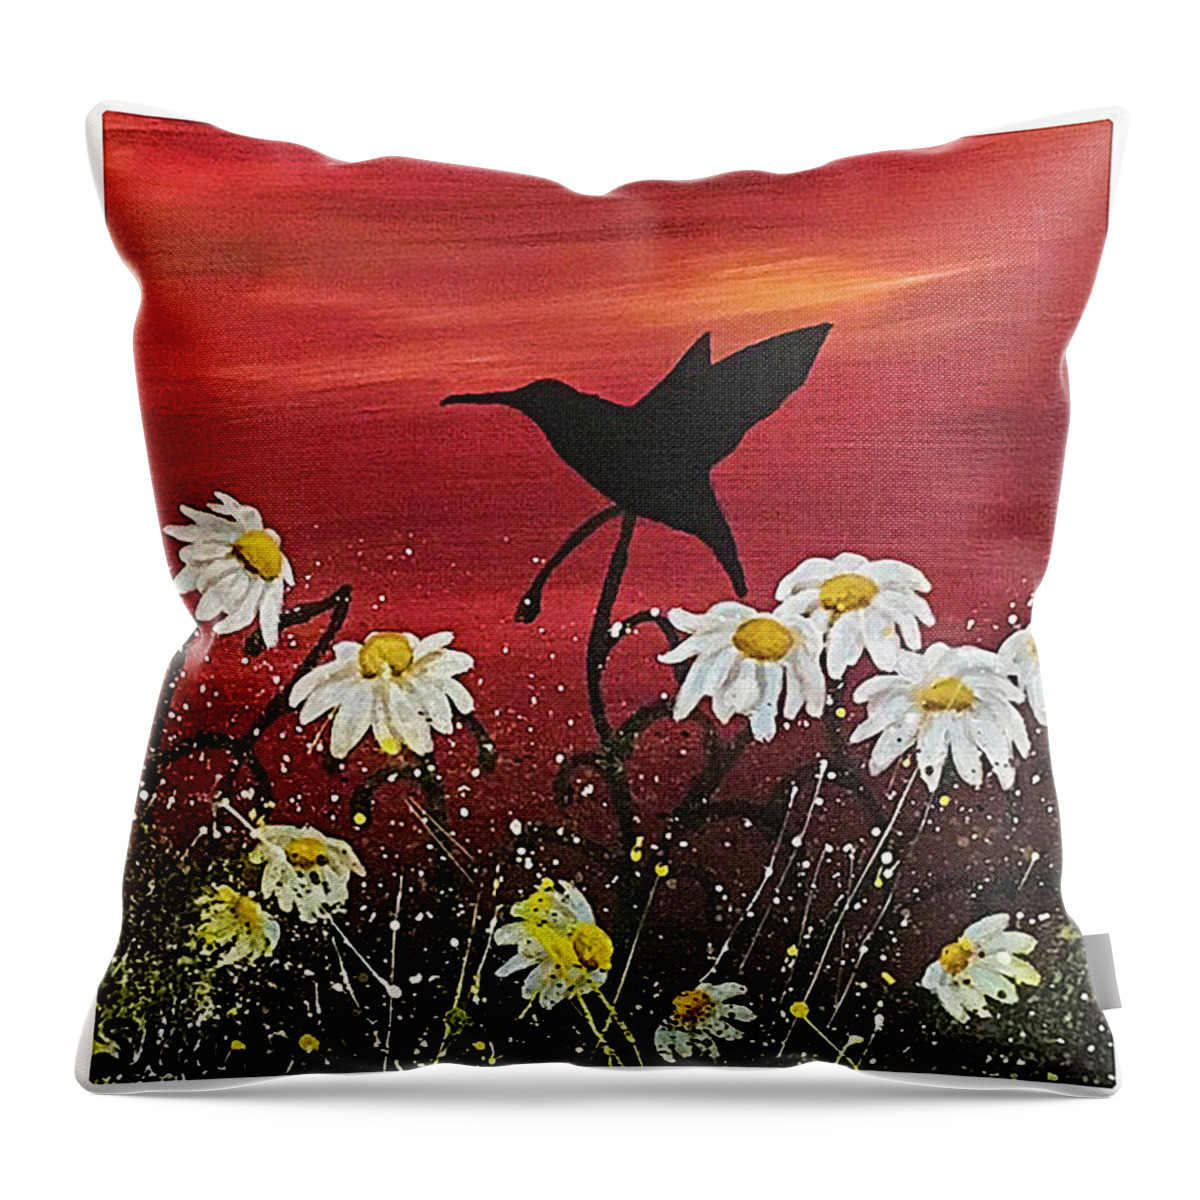 Sunset Throw Pillow featuring the painting Sunset by Shirley Dutchkowski